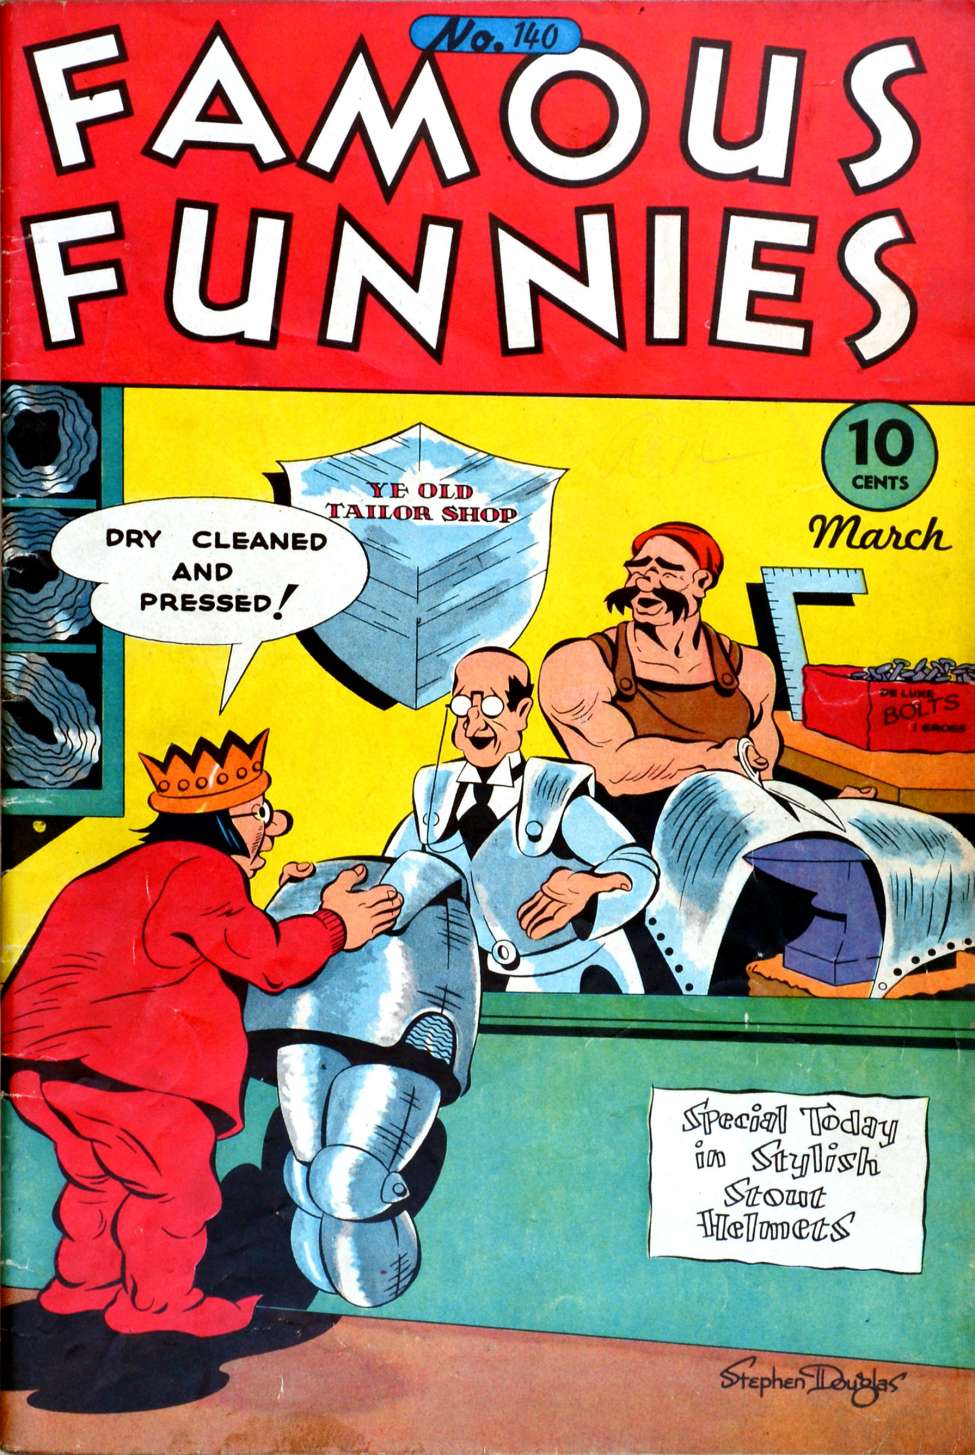 Book Cover For Famous Funnies 140 - Version 2